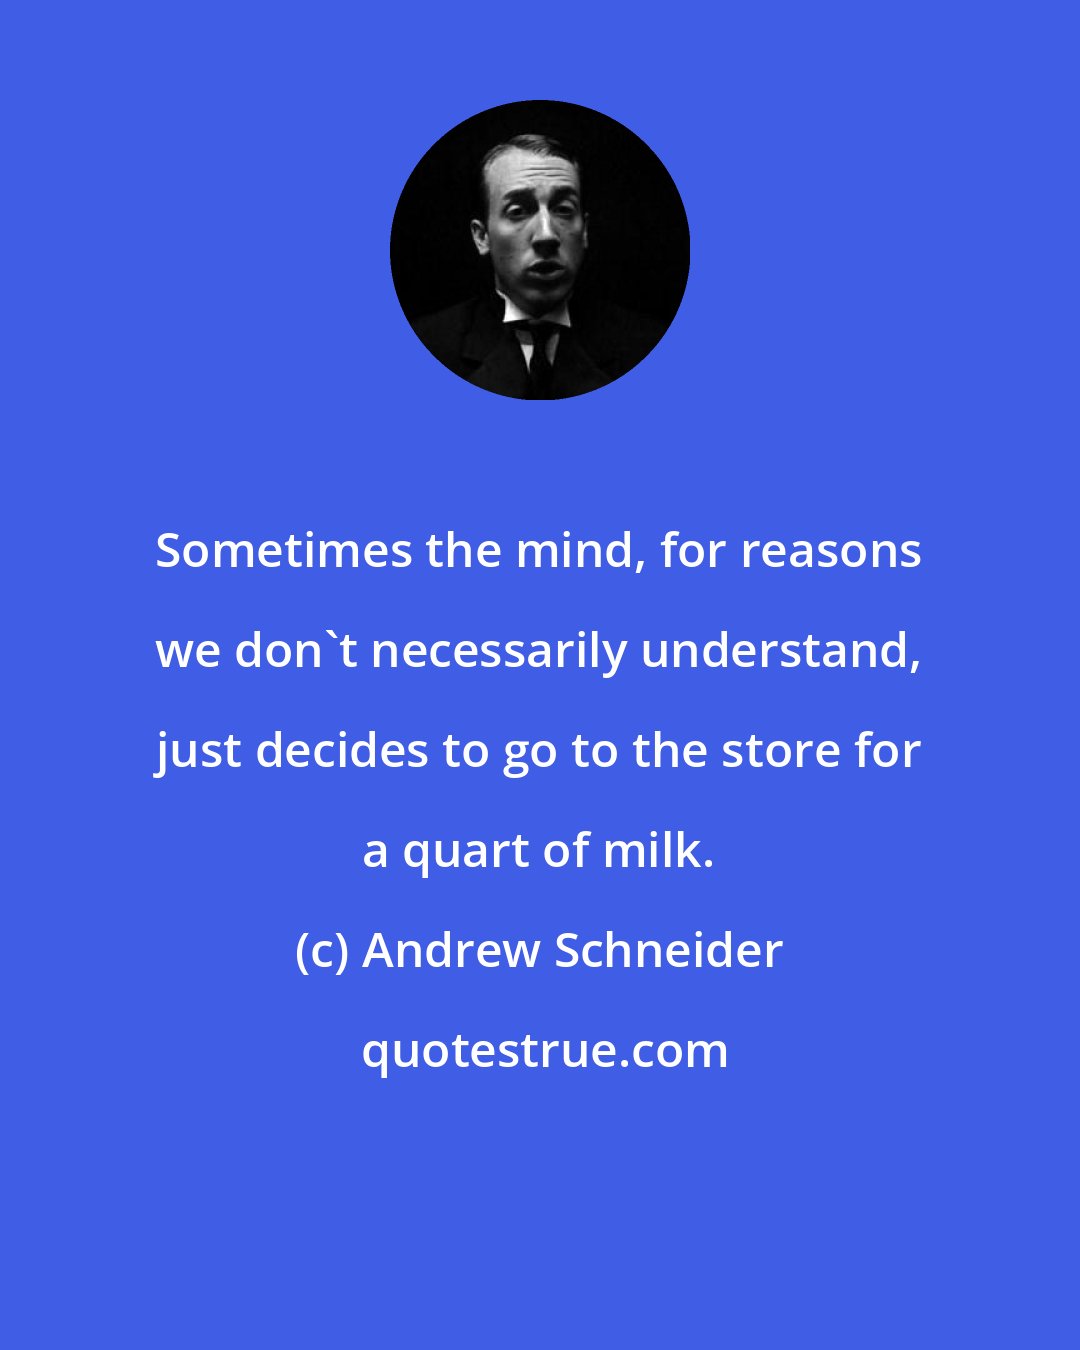 Andrew Schneider: Sometimes the mind, for reasons we don't necessarily understand, just decides to go to the store for a quart of milk.